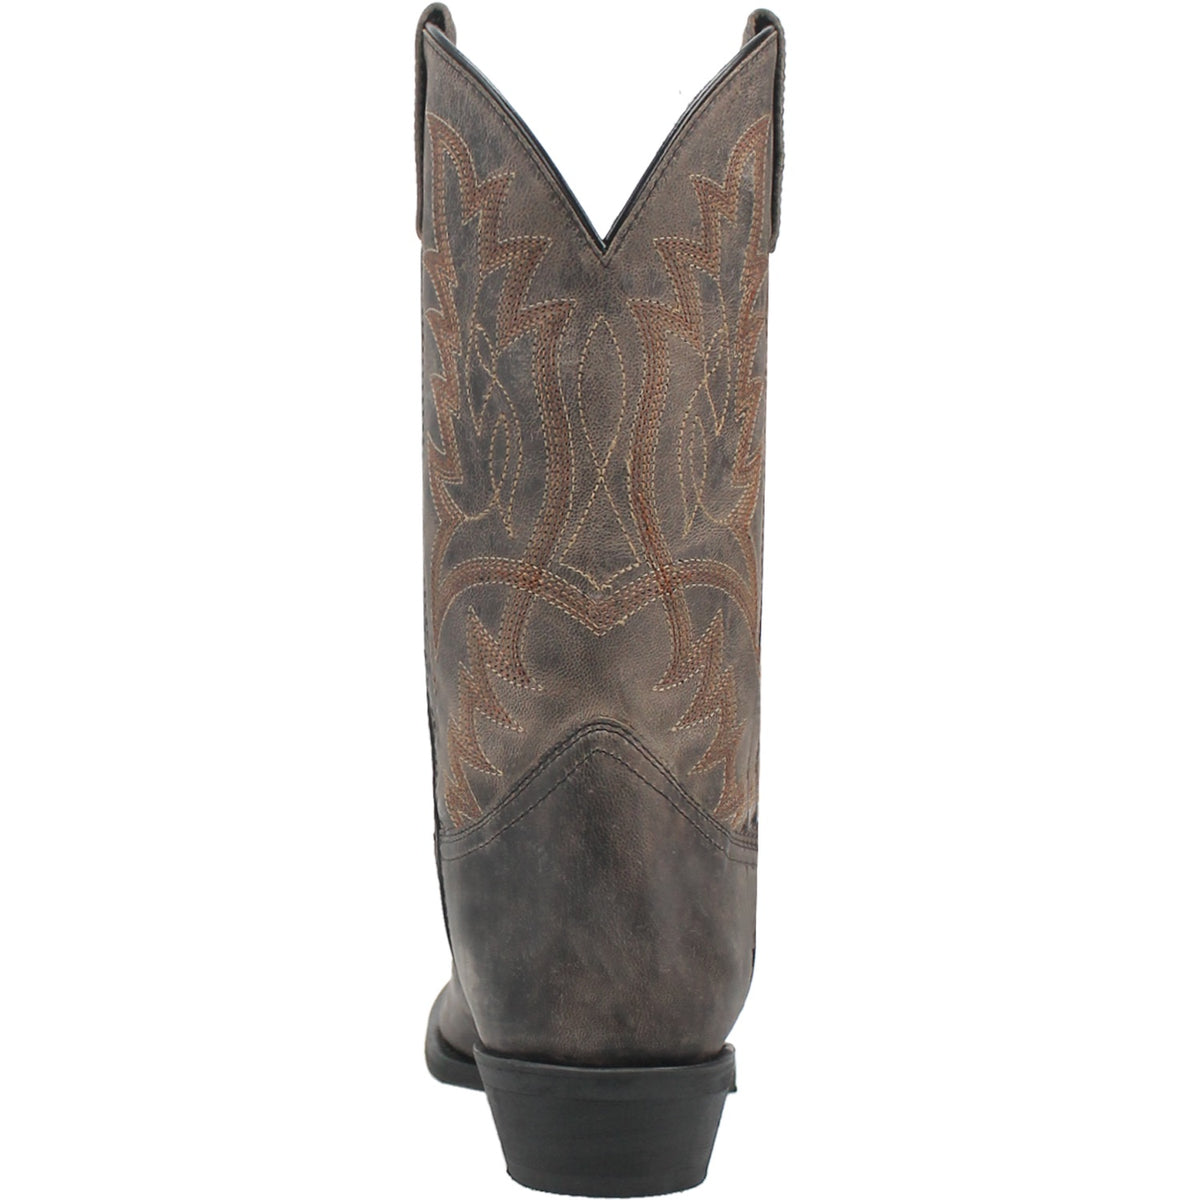 WELLER LEATHER BOOT Cover